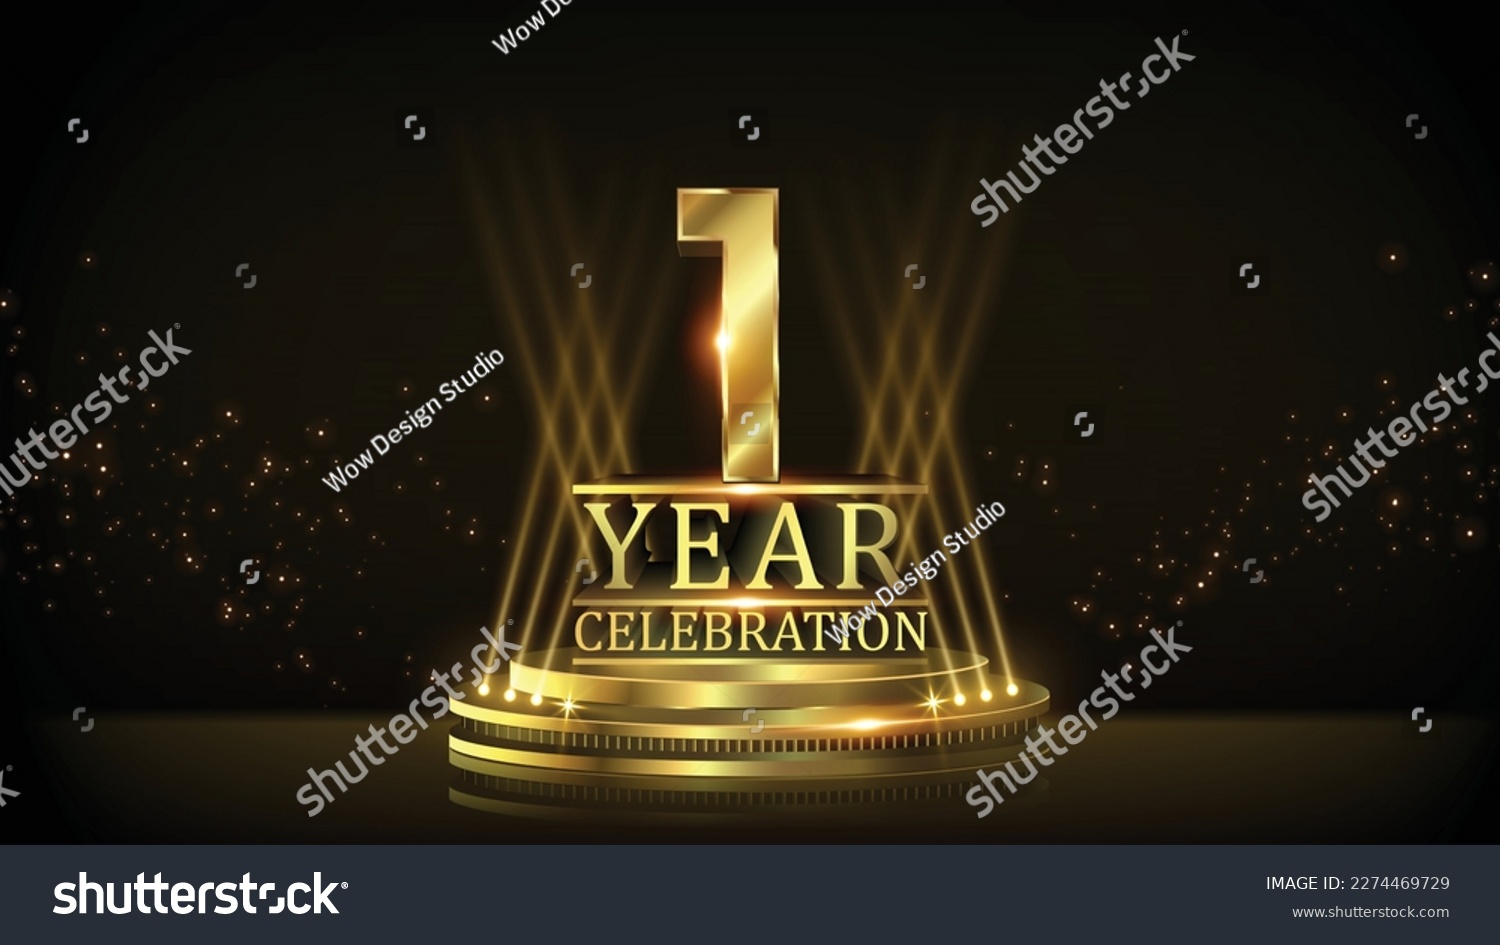 1 year Celebration Golden Jubilee Award Graphics Background. Entertainment Spot Light Hollywood Template  Luxury Premium Corporate Abstract Design Template Banner Certificate.  #2274469729